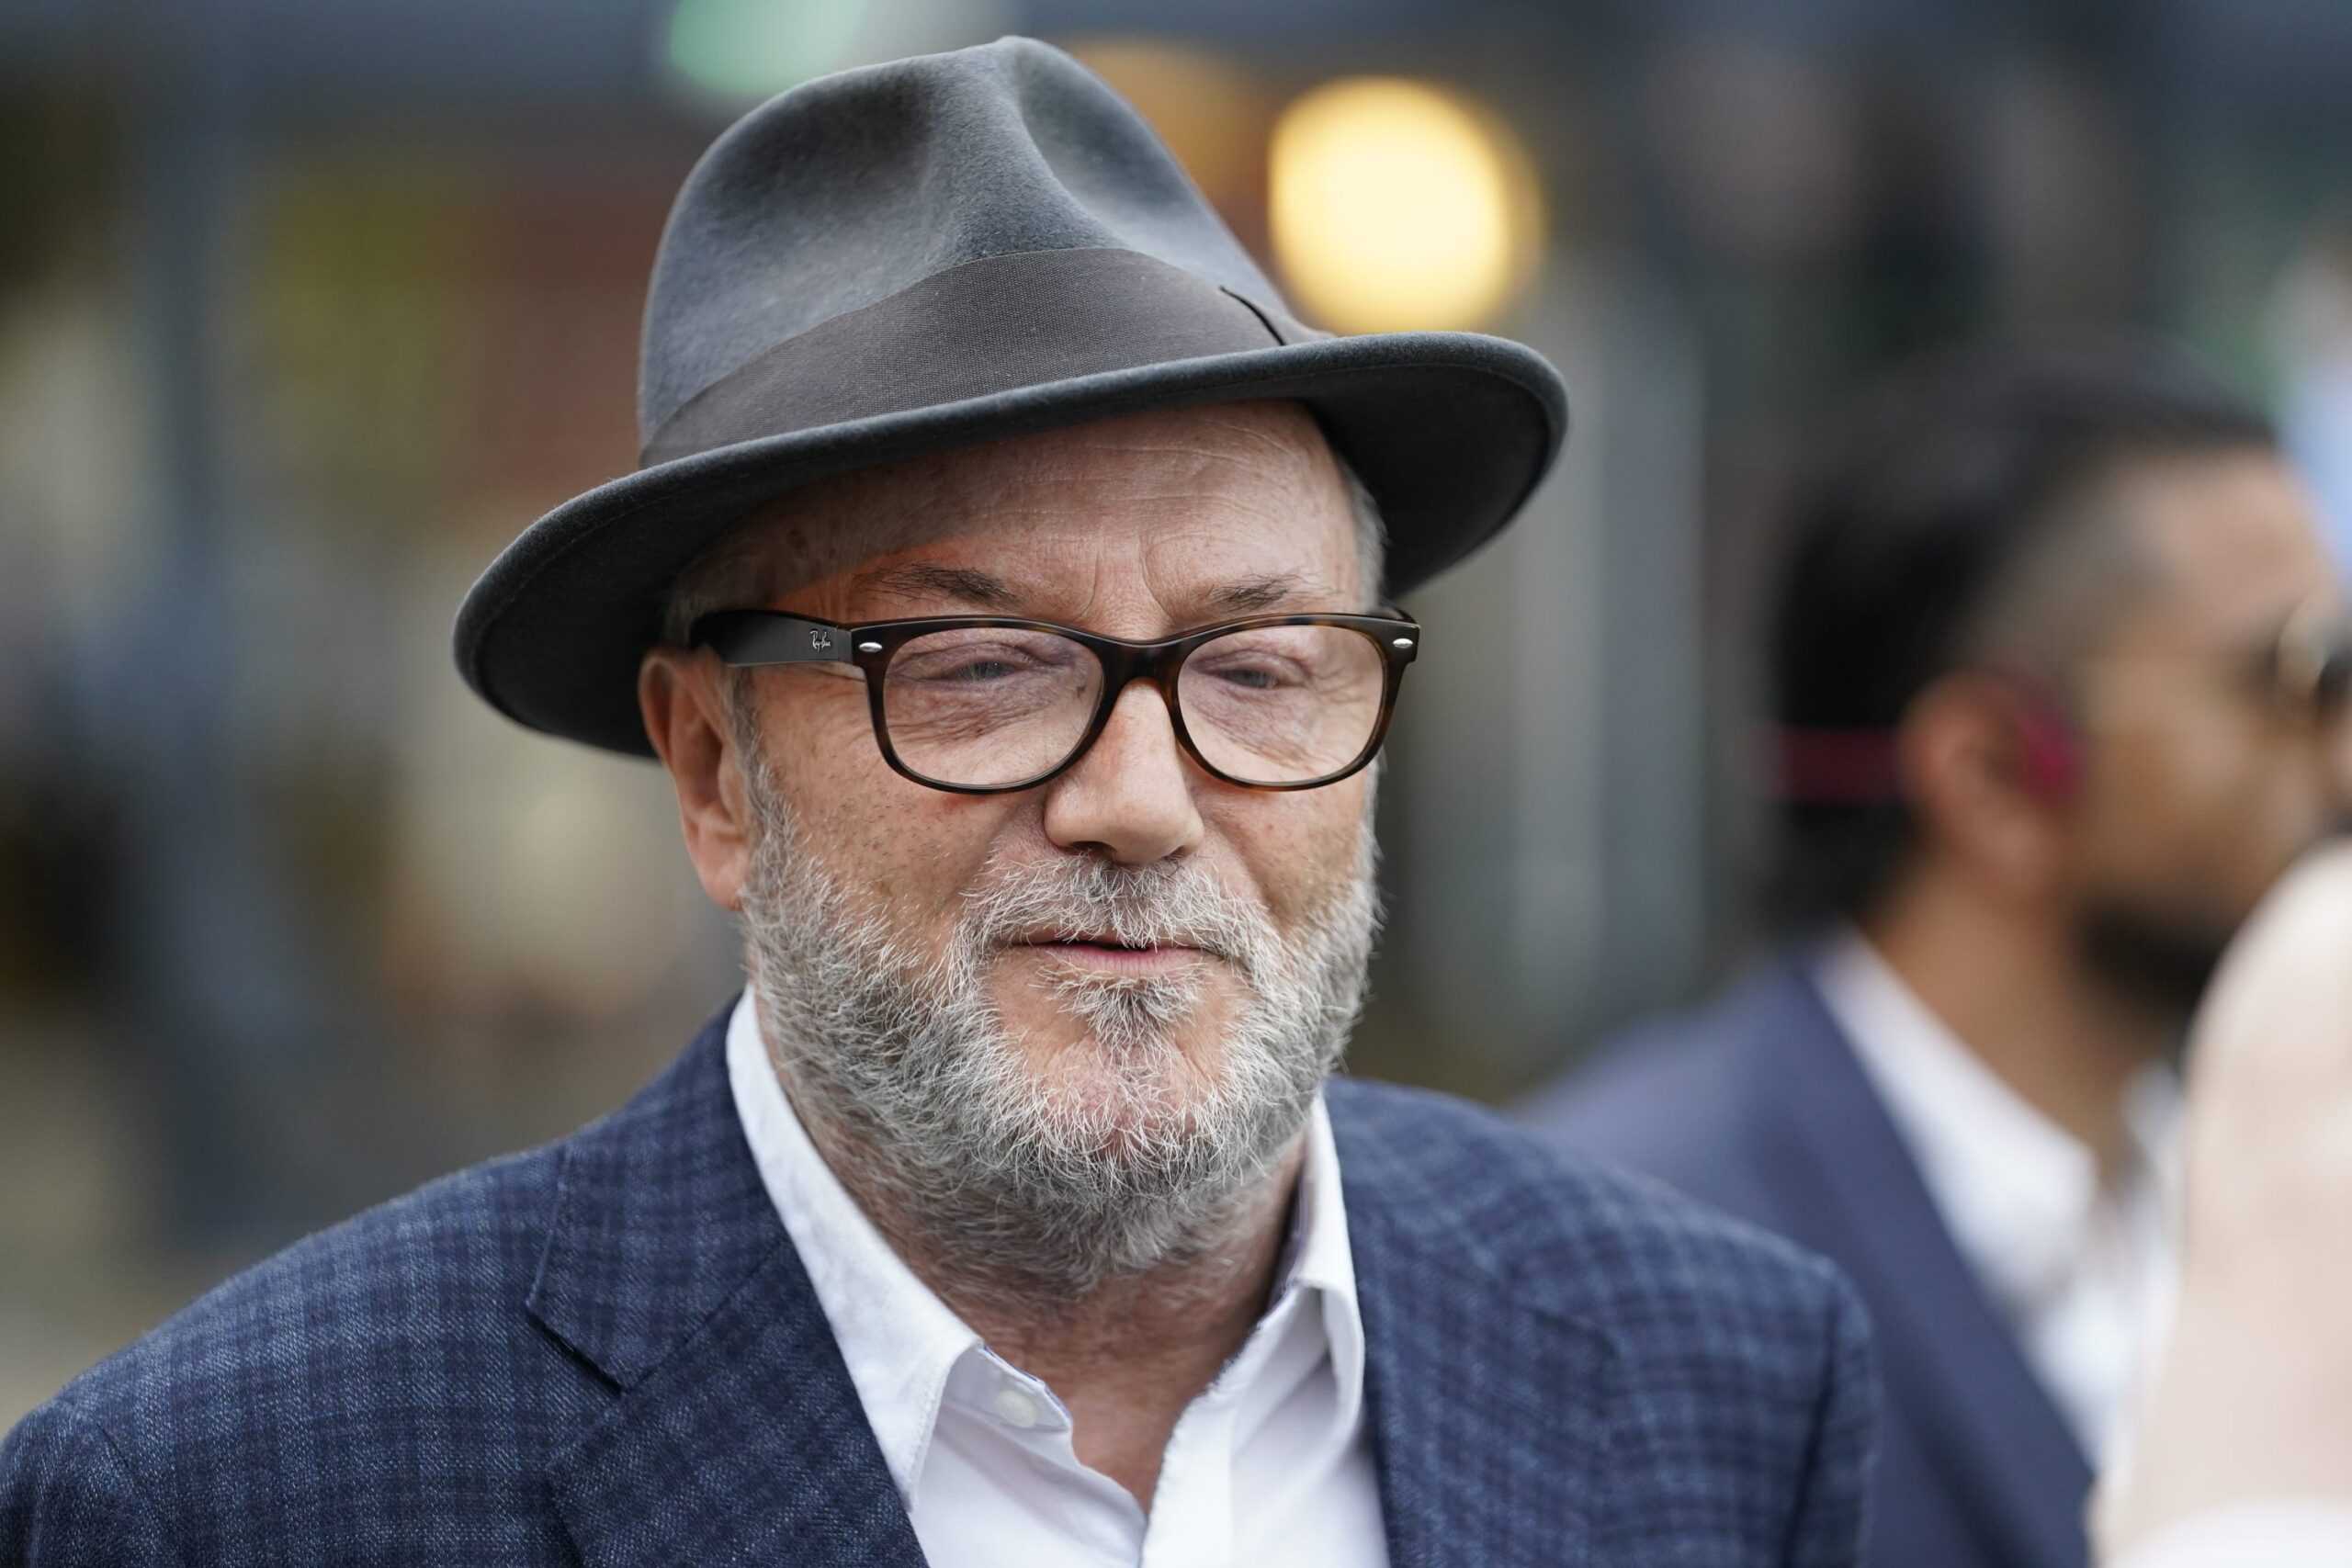 George Galloway considering running for Manchester mayor… just weeks after winning Rochdale seat